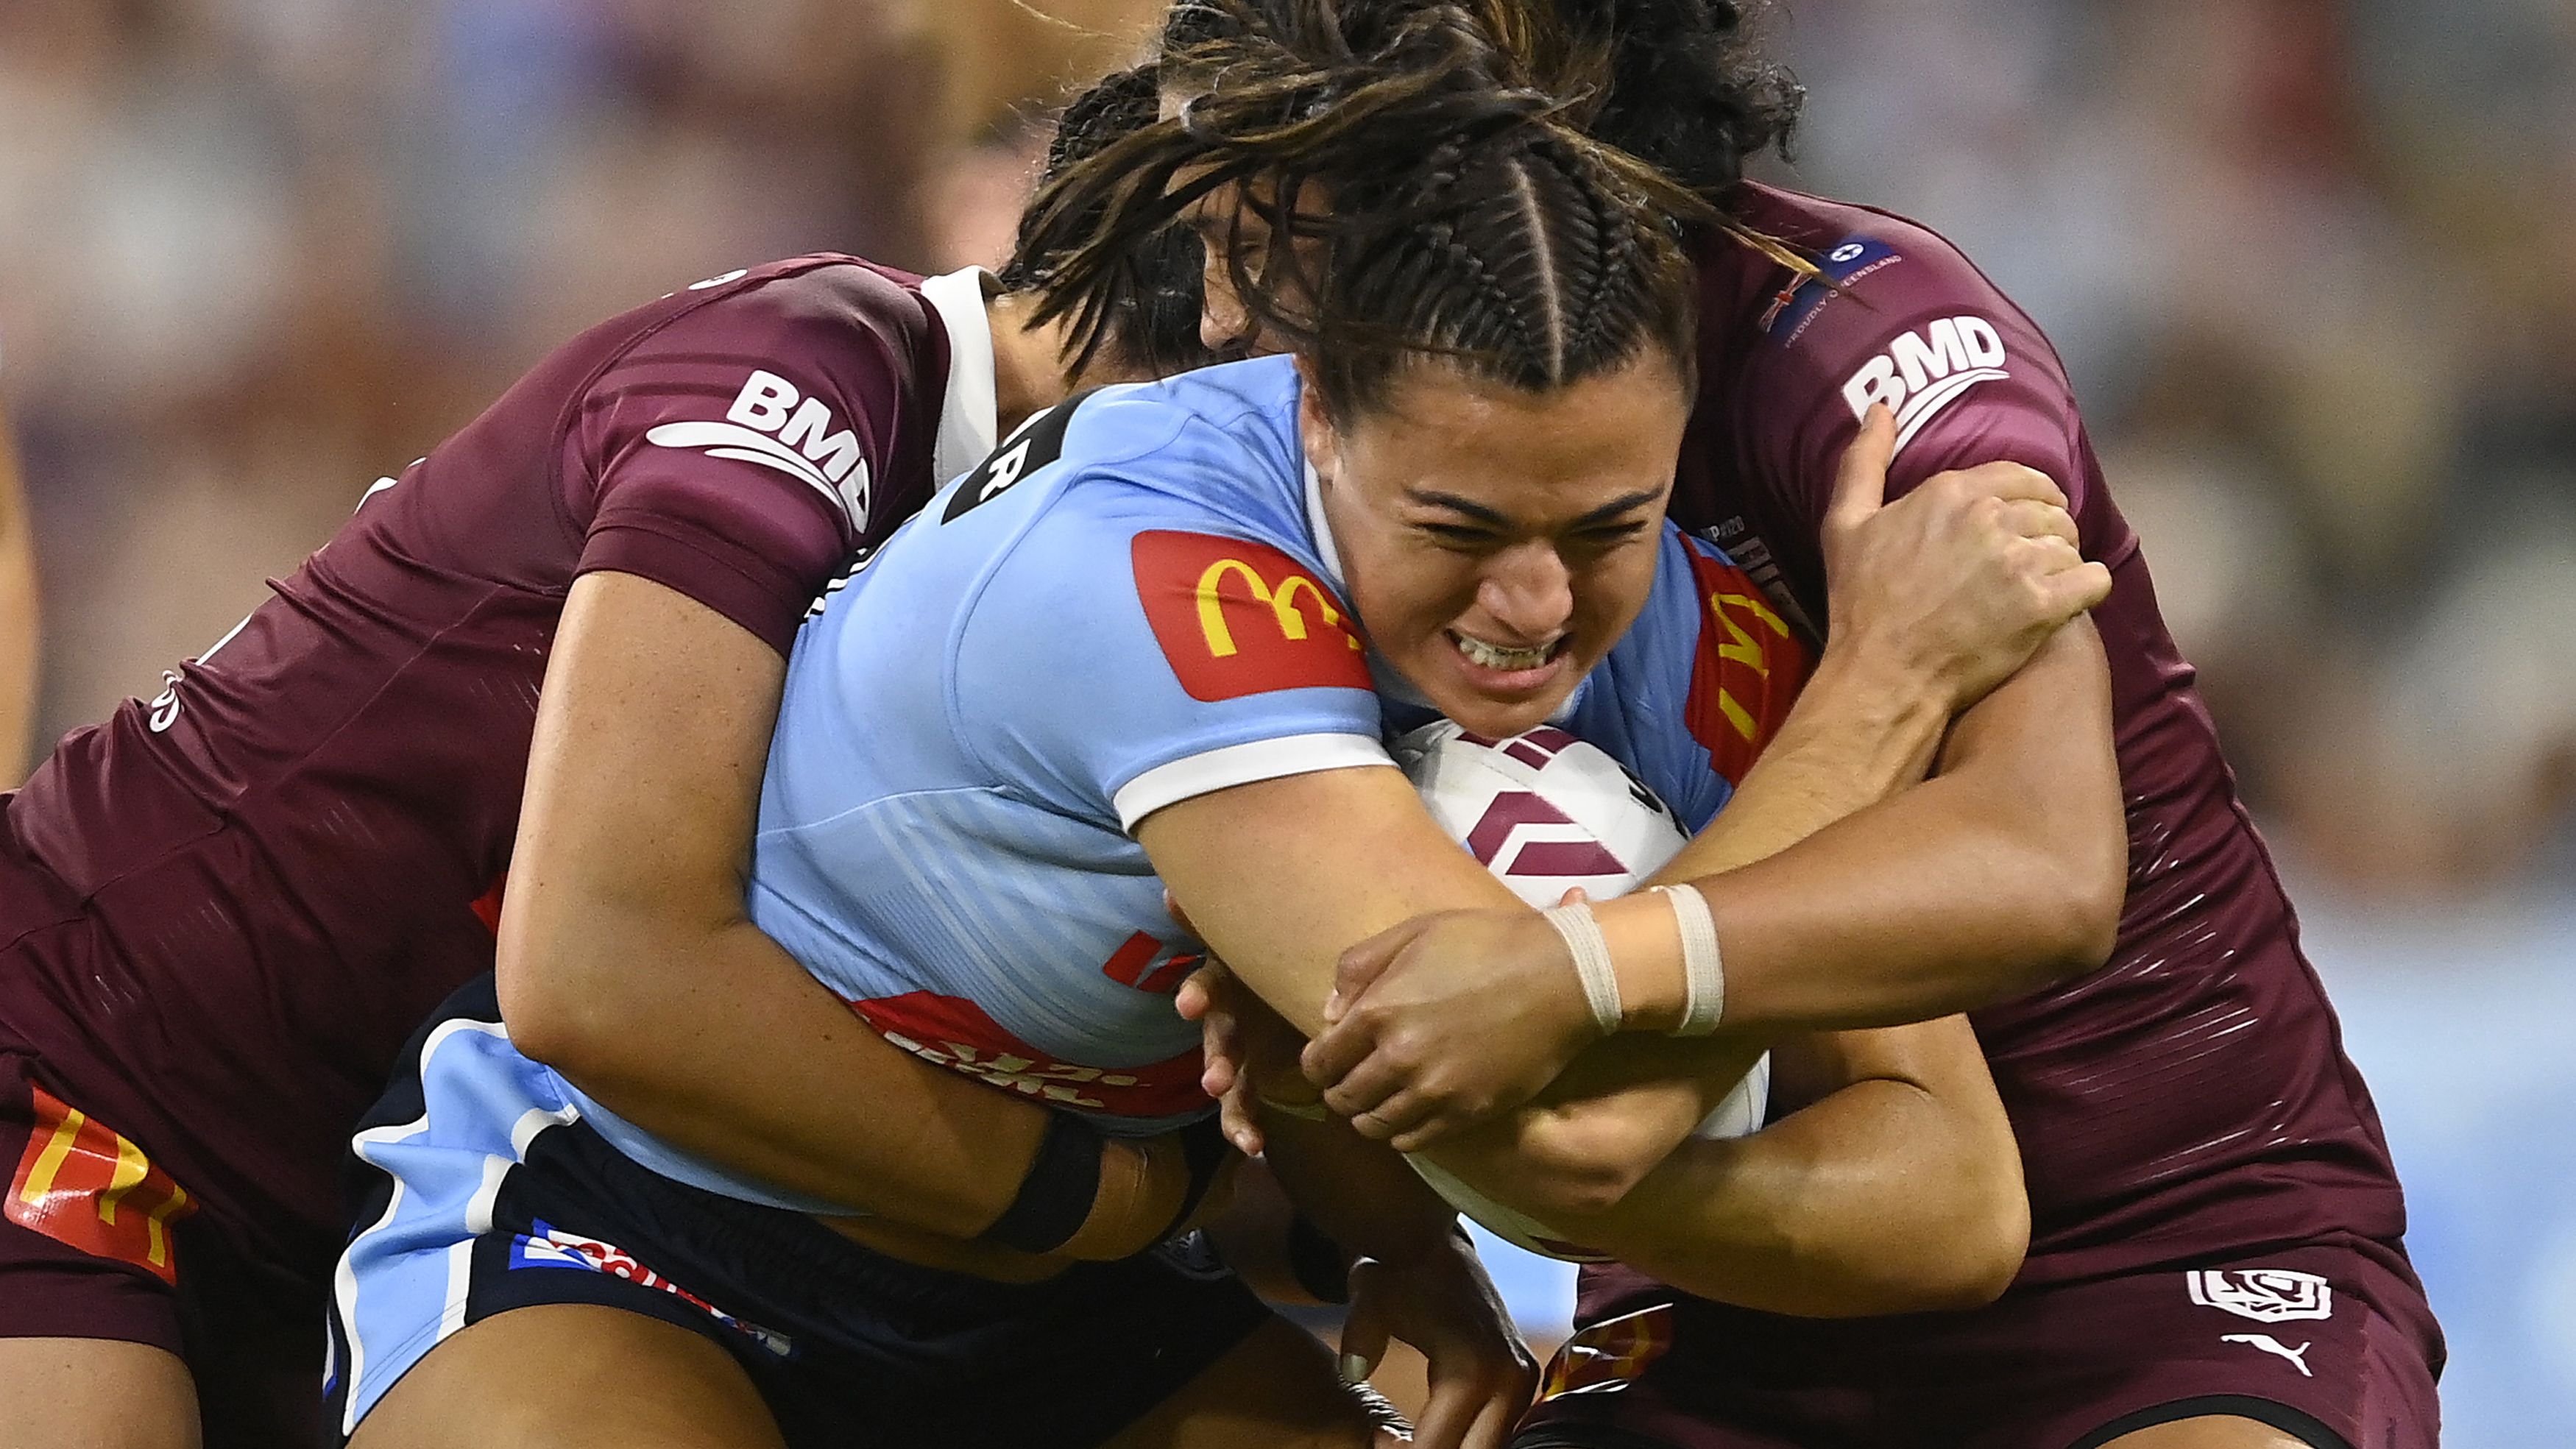 'Nurture that success': NRLW stars warn against hasty expansion plans after strong season